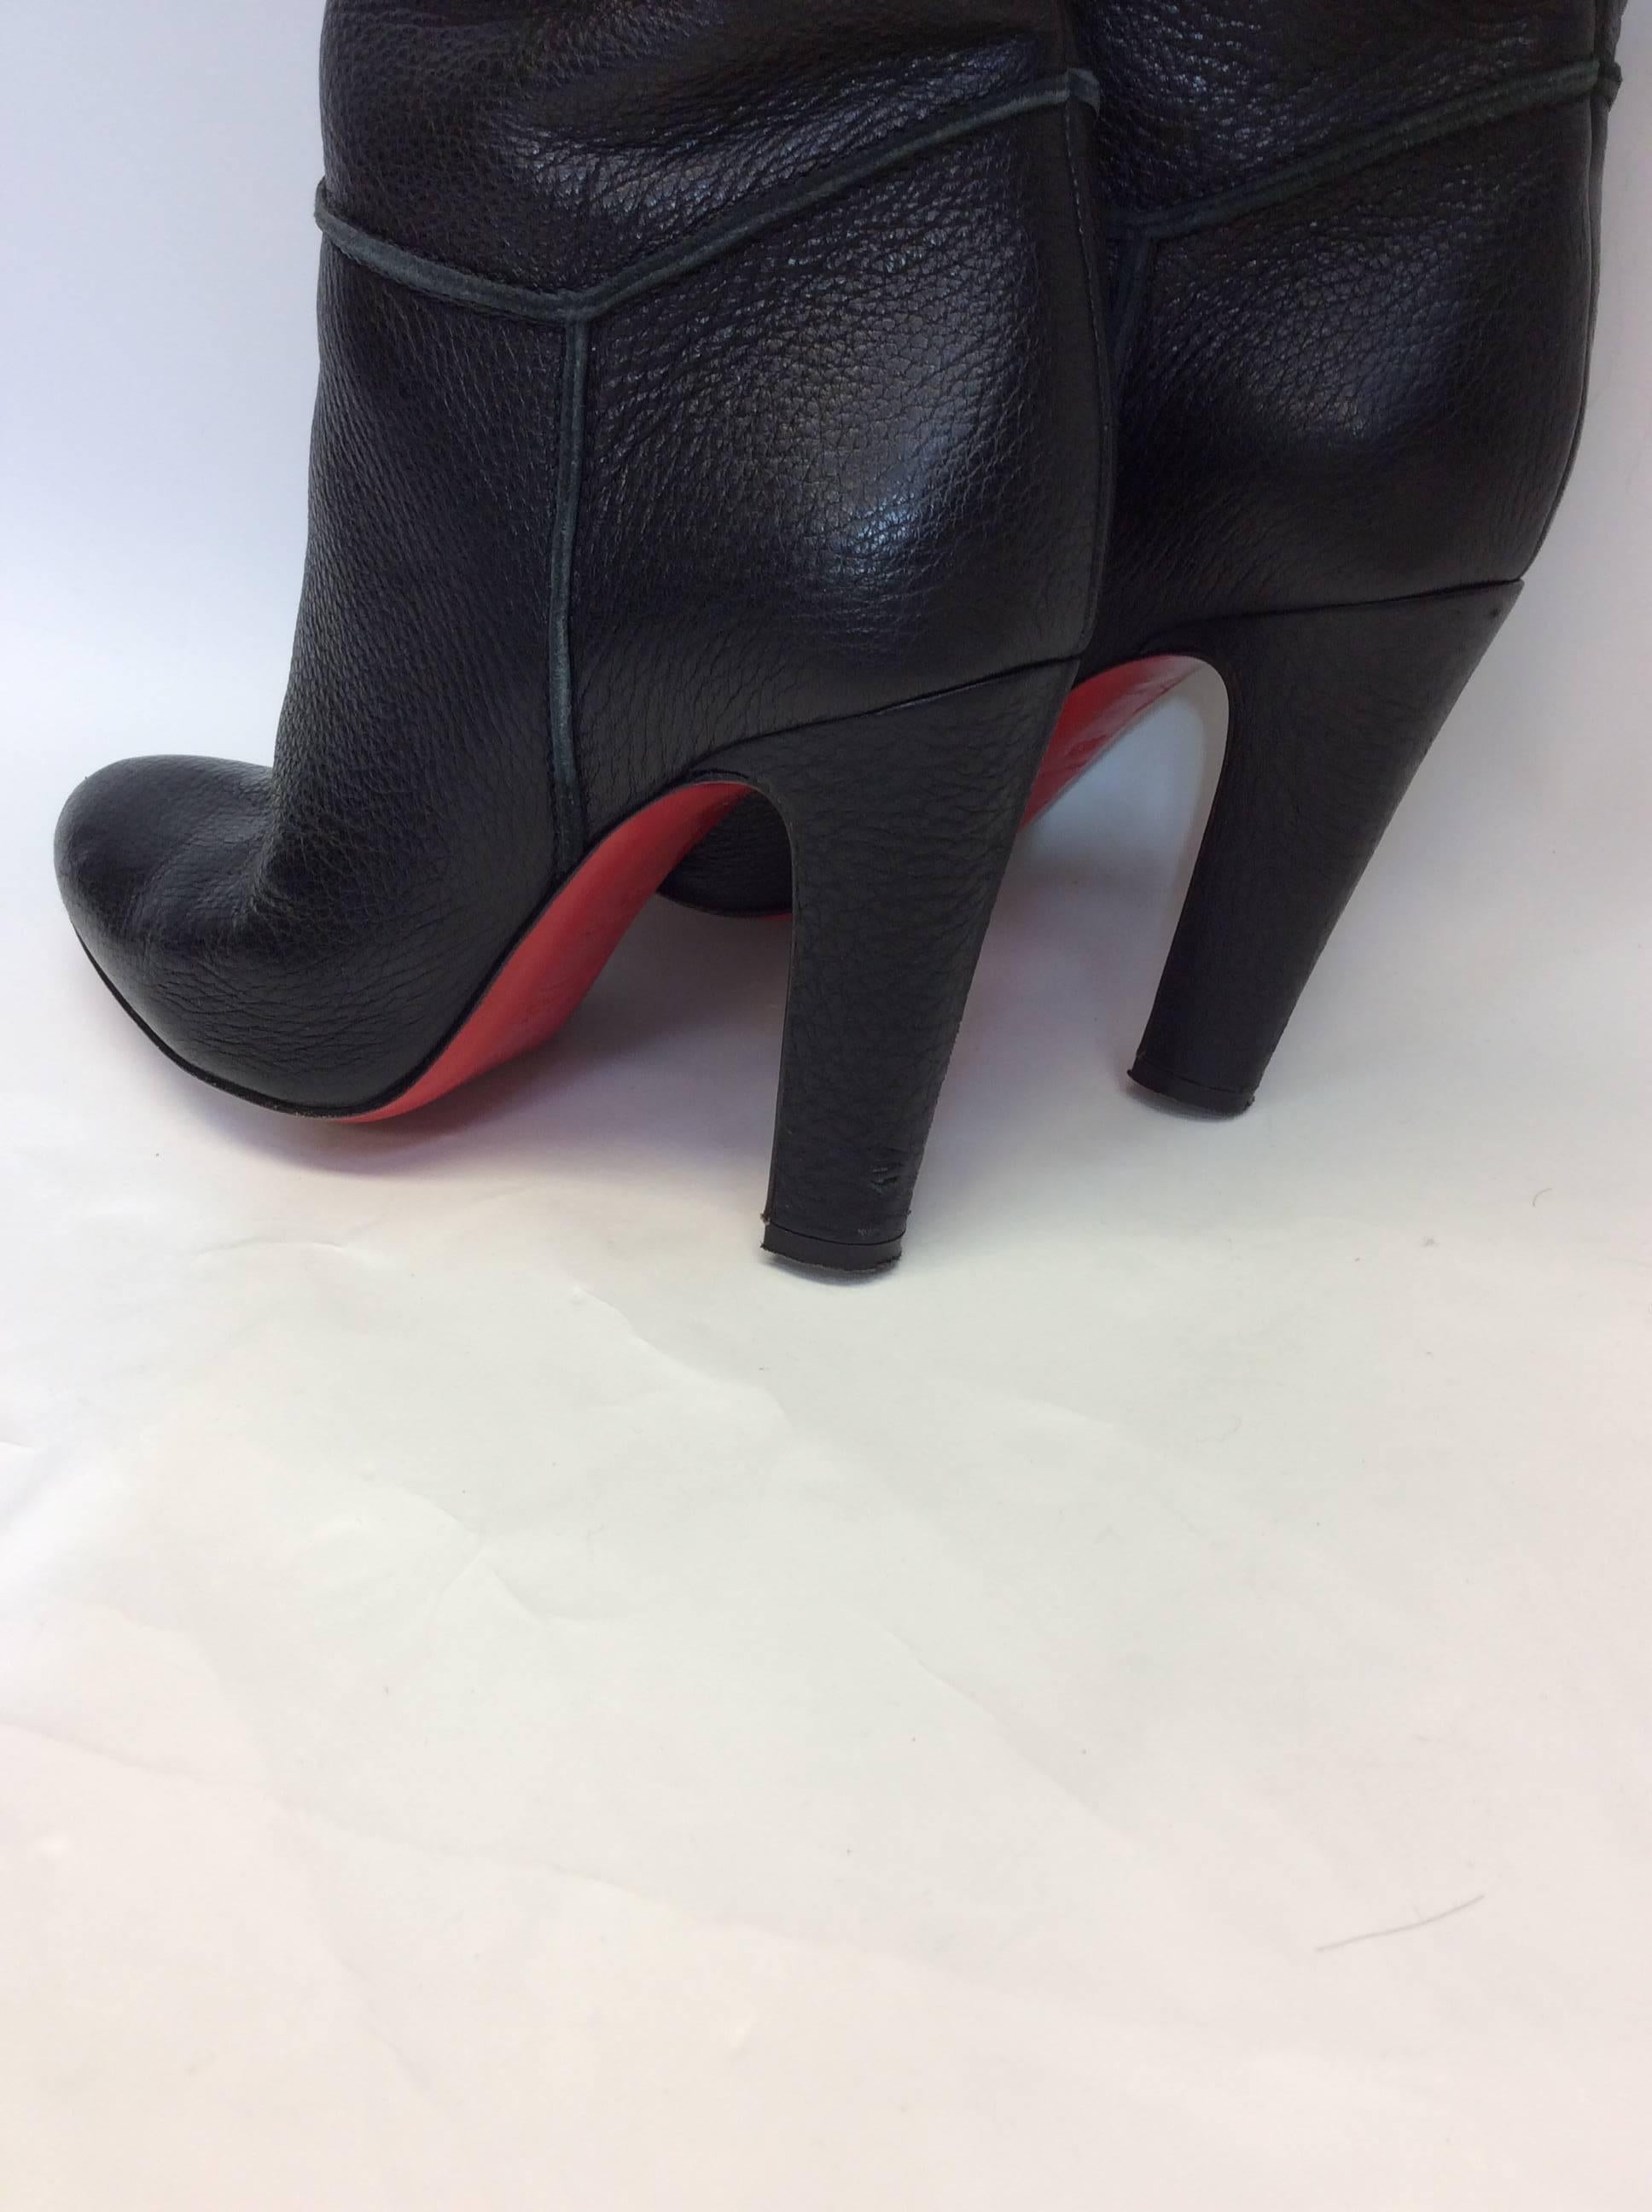 Christian Louboutin Black Over The Knee Boots  In Excellent Condition For Sale In Narberth, PA